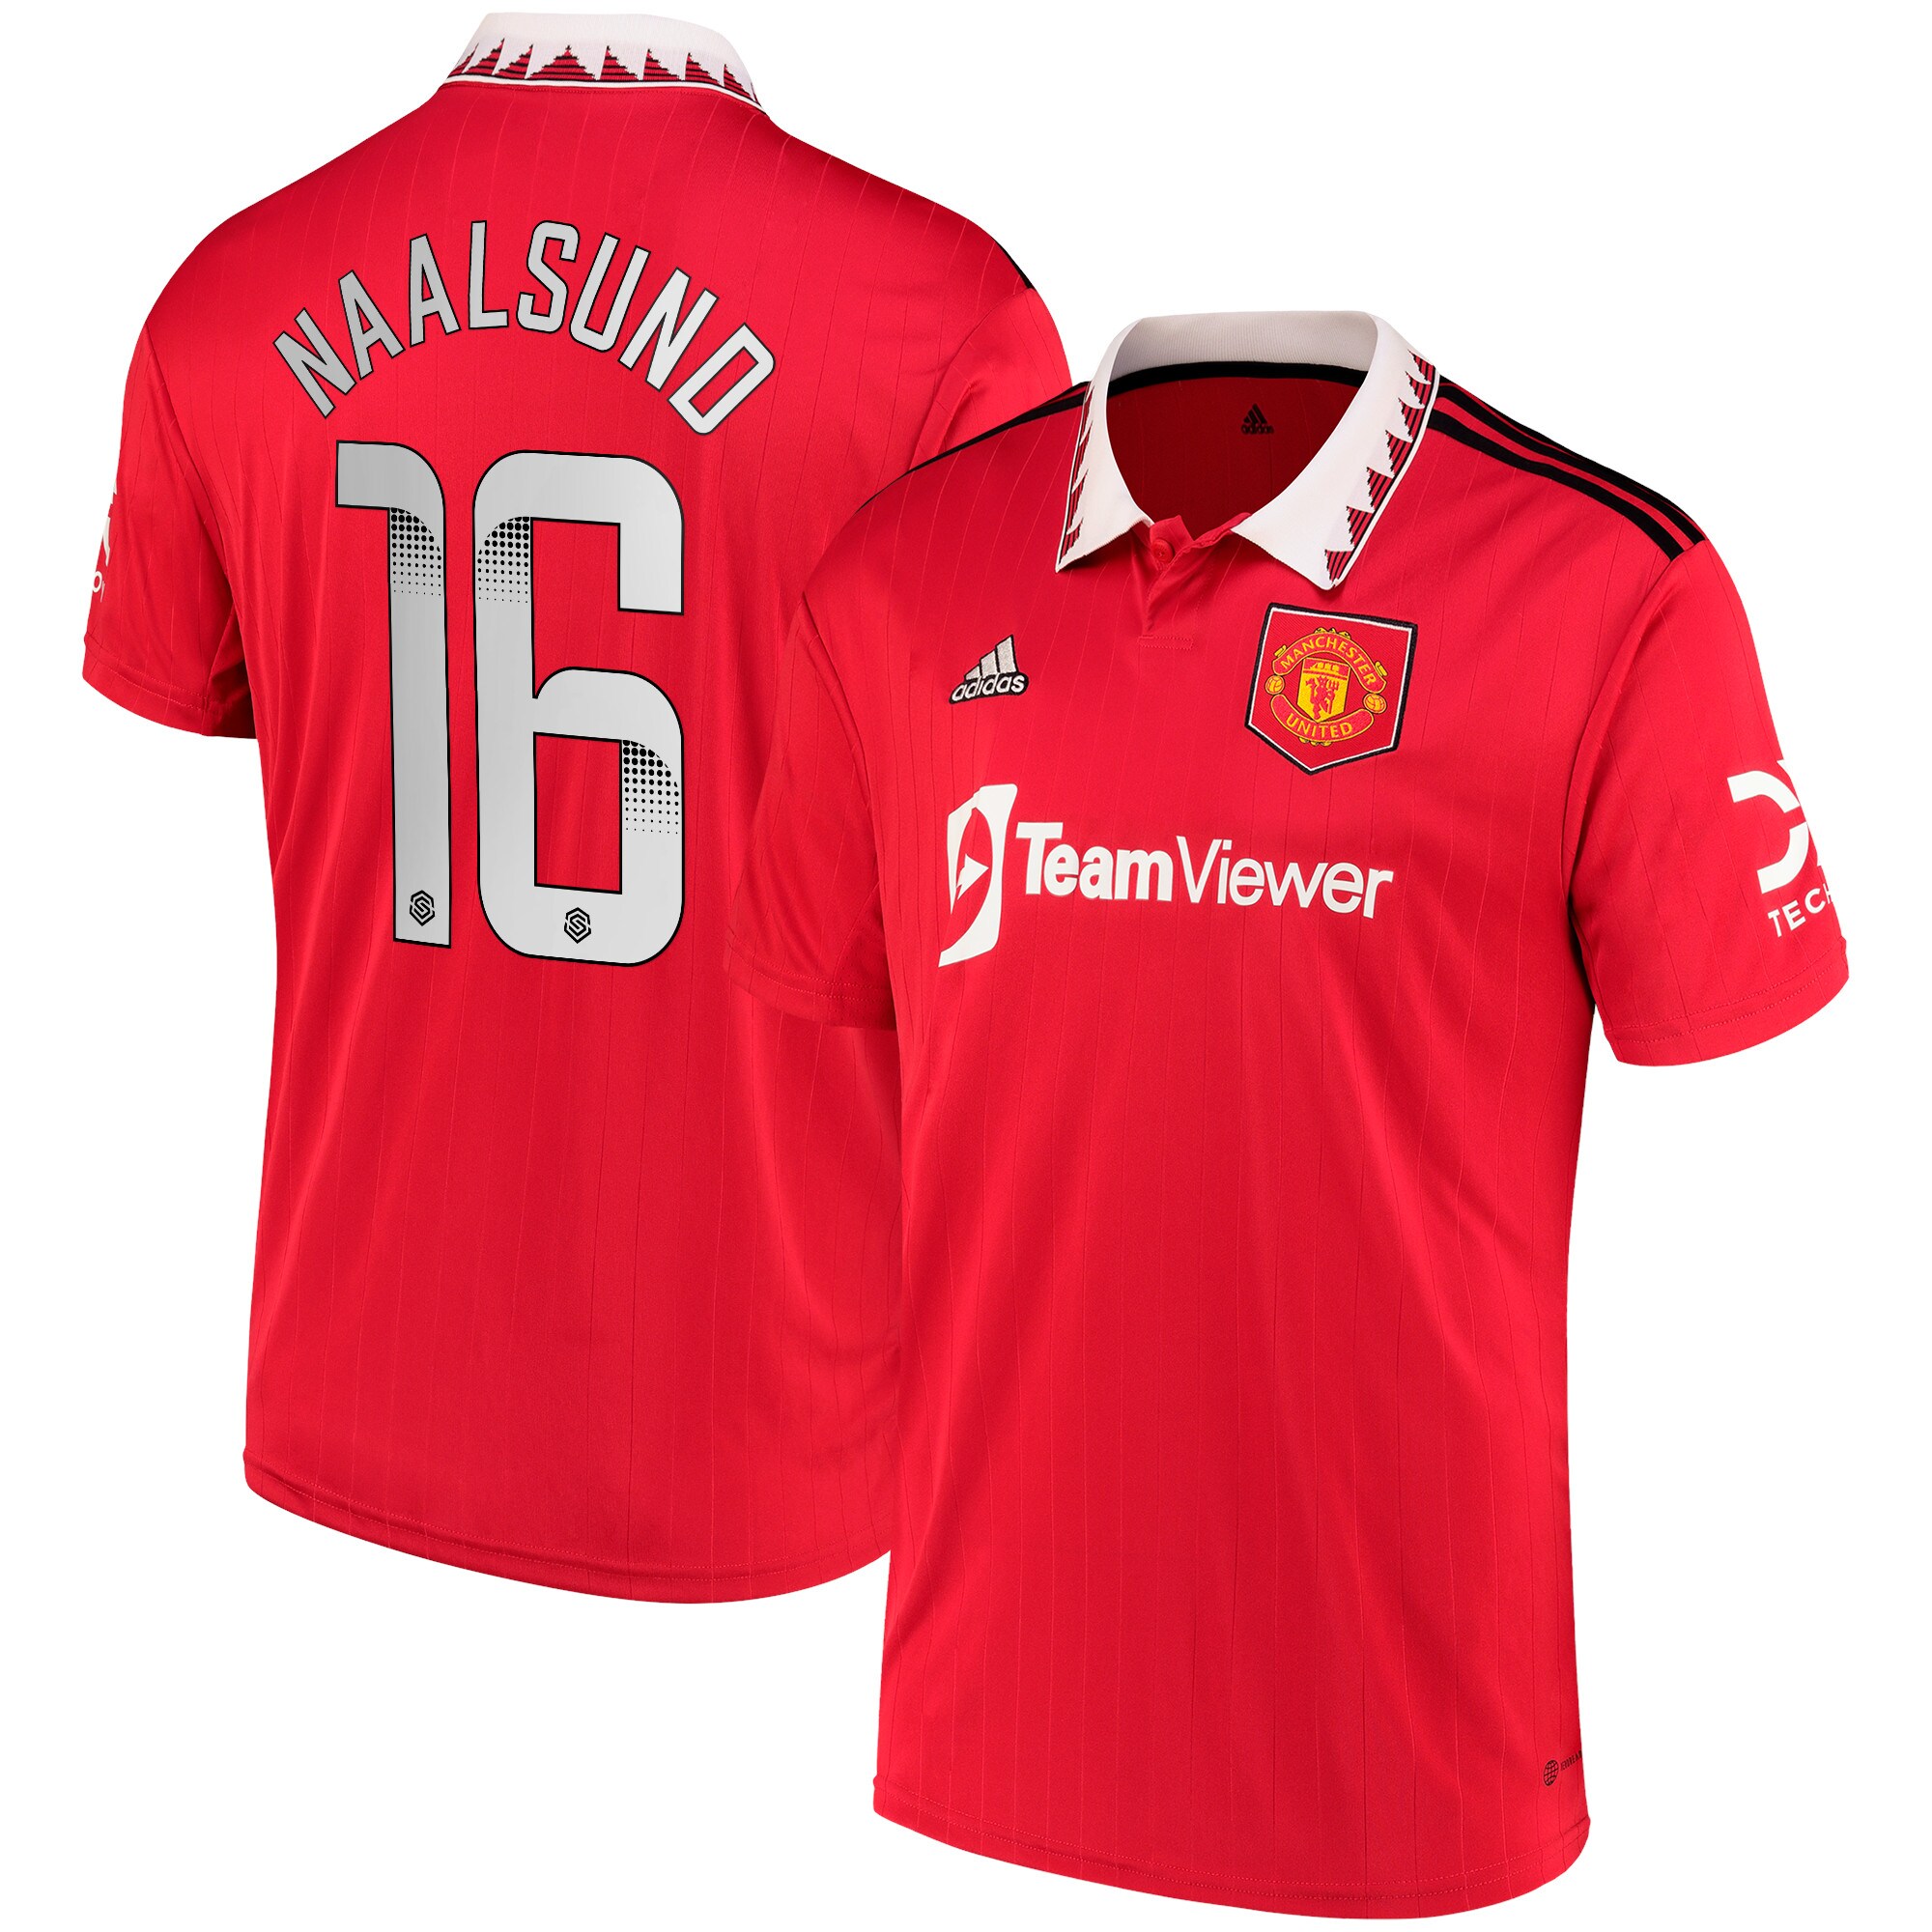 Manchester United WSL Home Shirt 2022-23 with Naalsund 16 printing